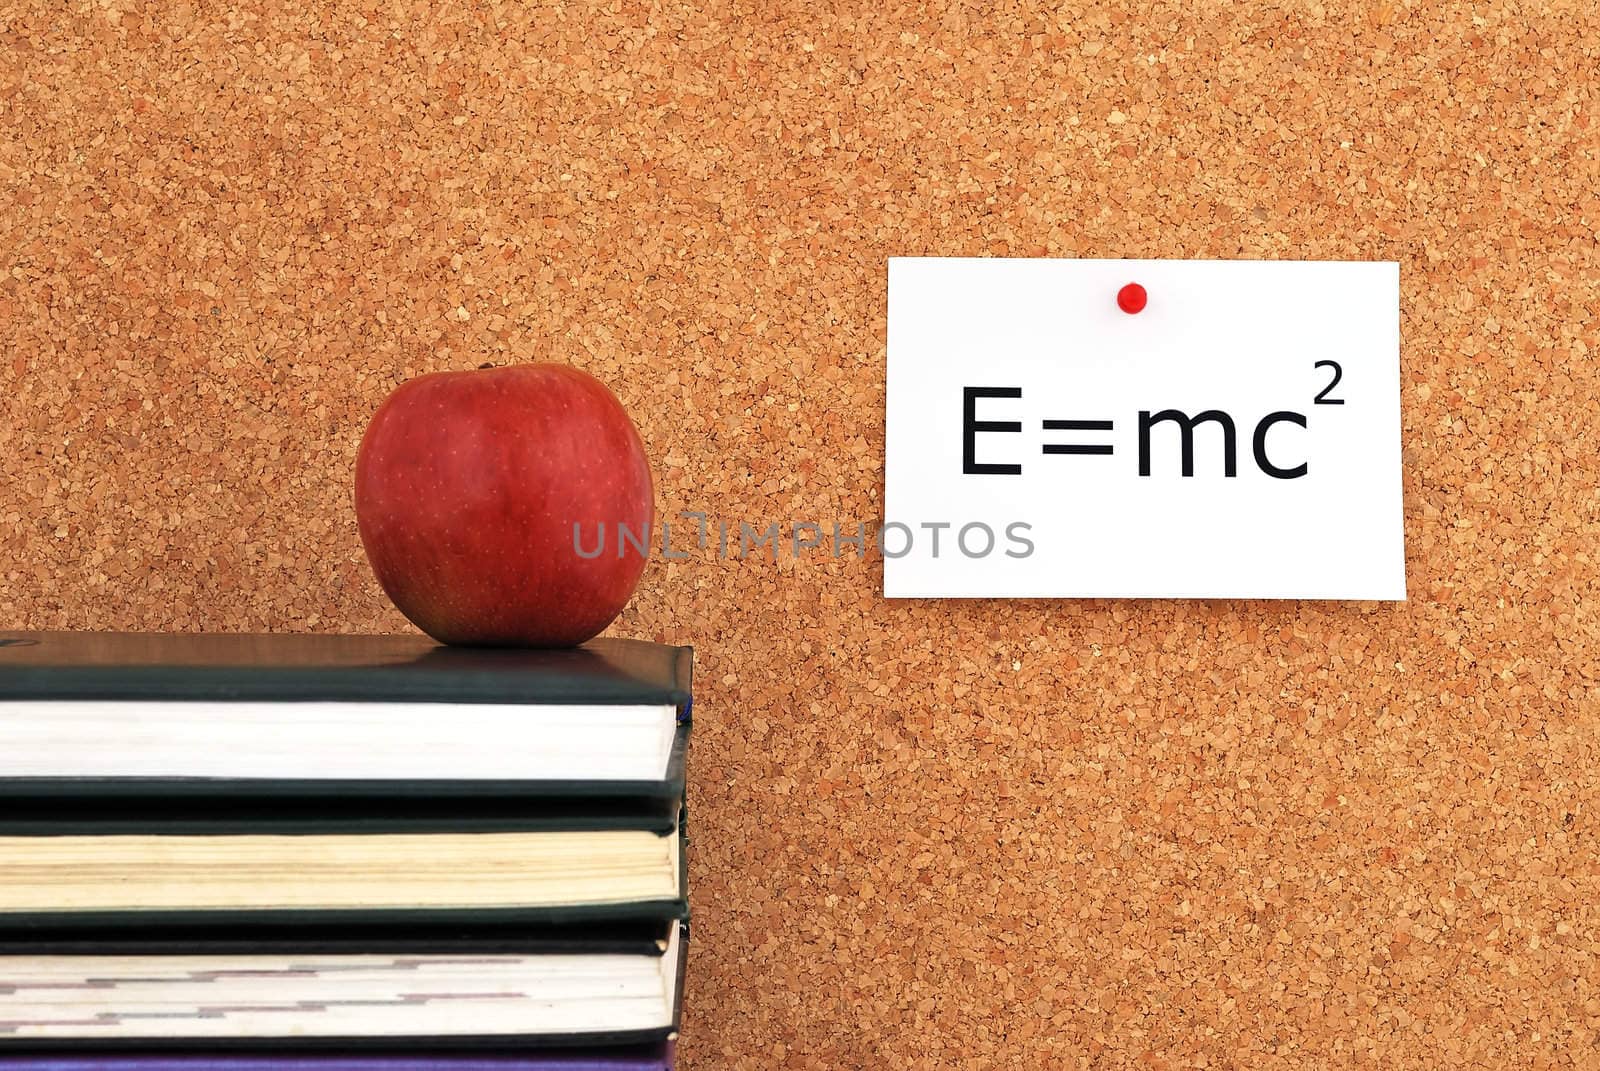 apple and books. against the background of the inscription cork board